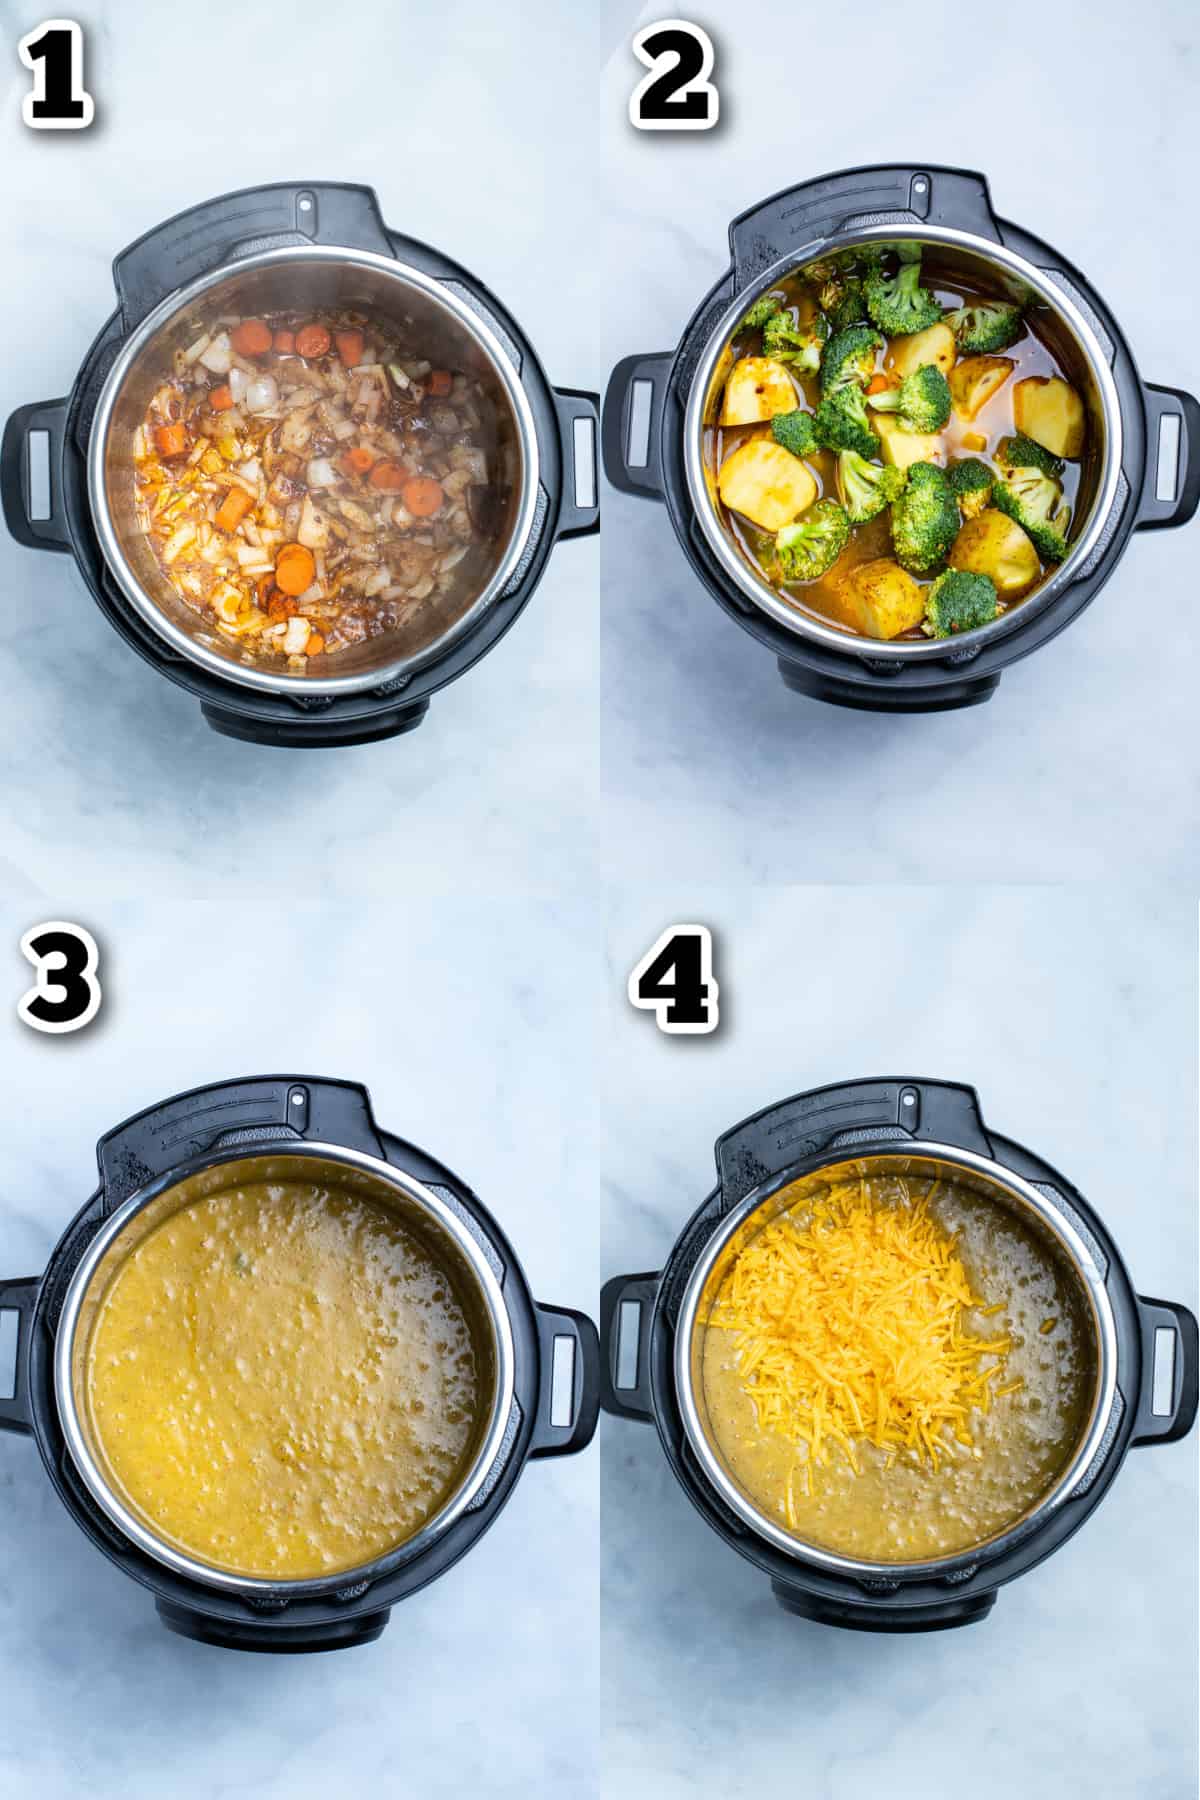 Steps for broccoli cheddar soup from beginning to end